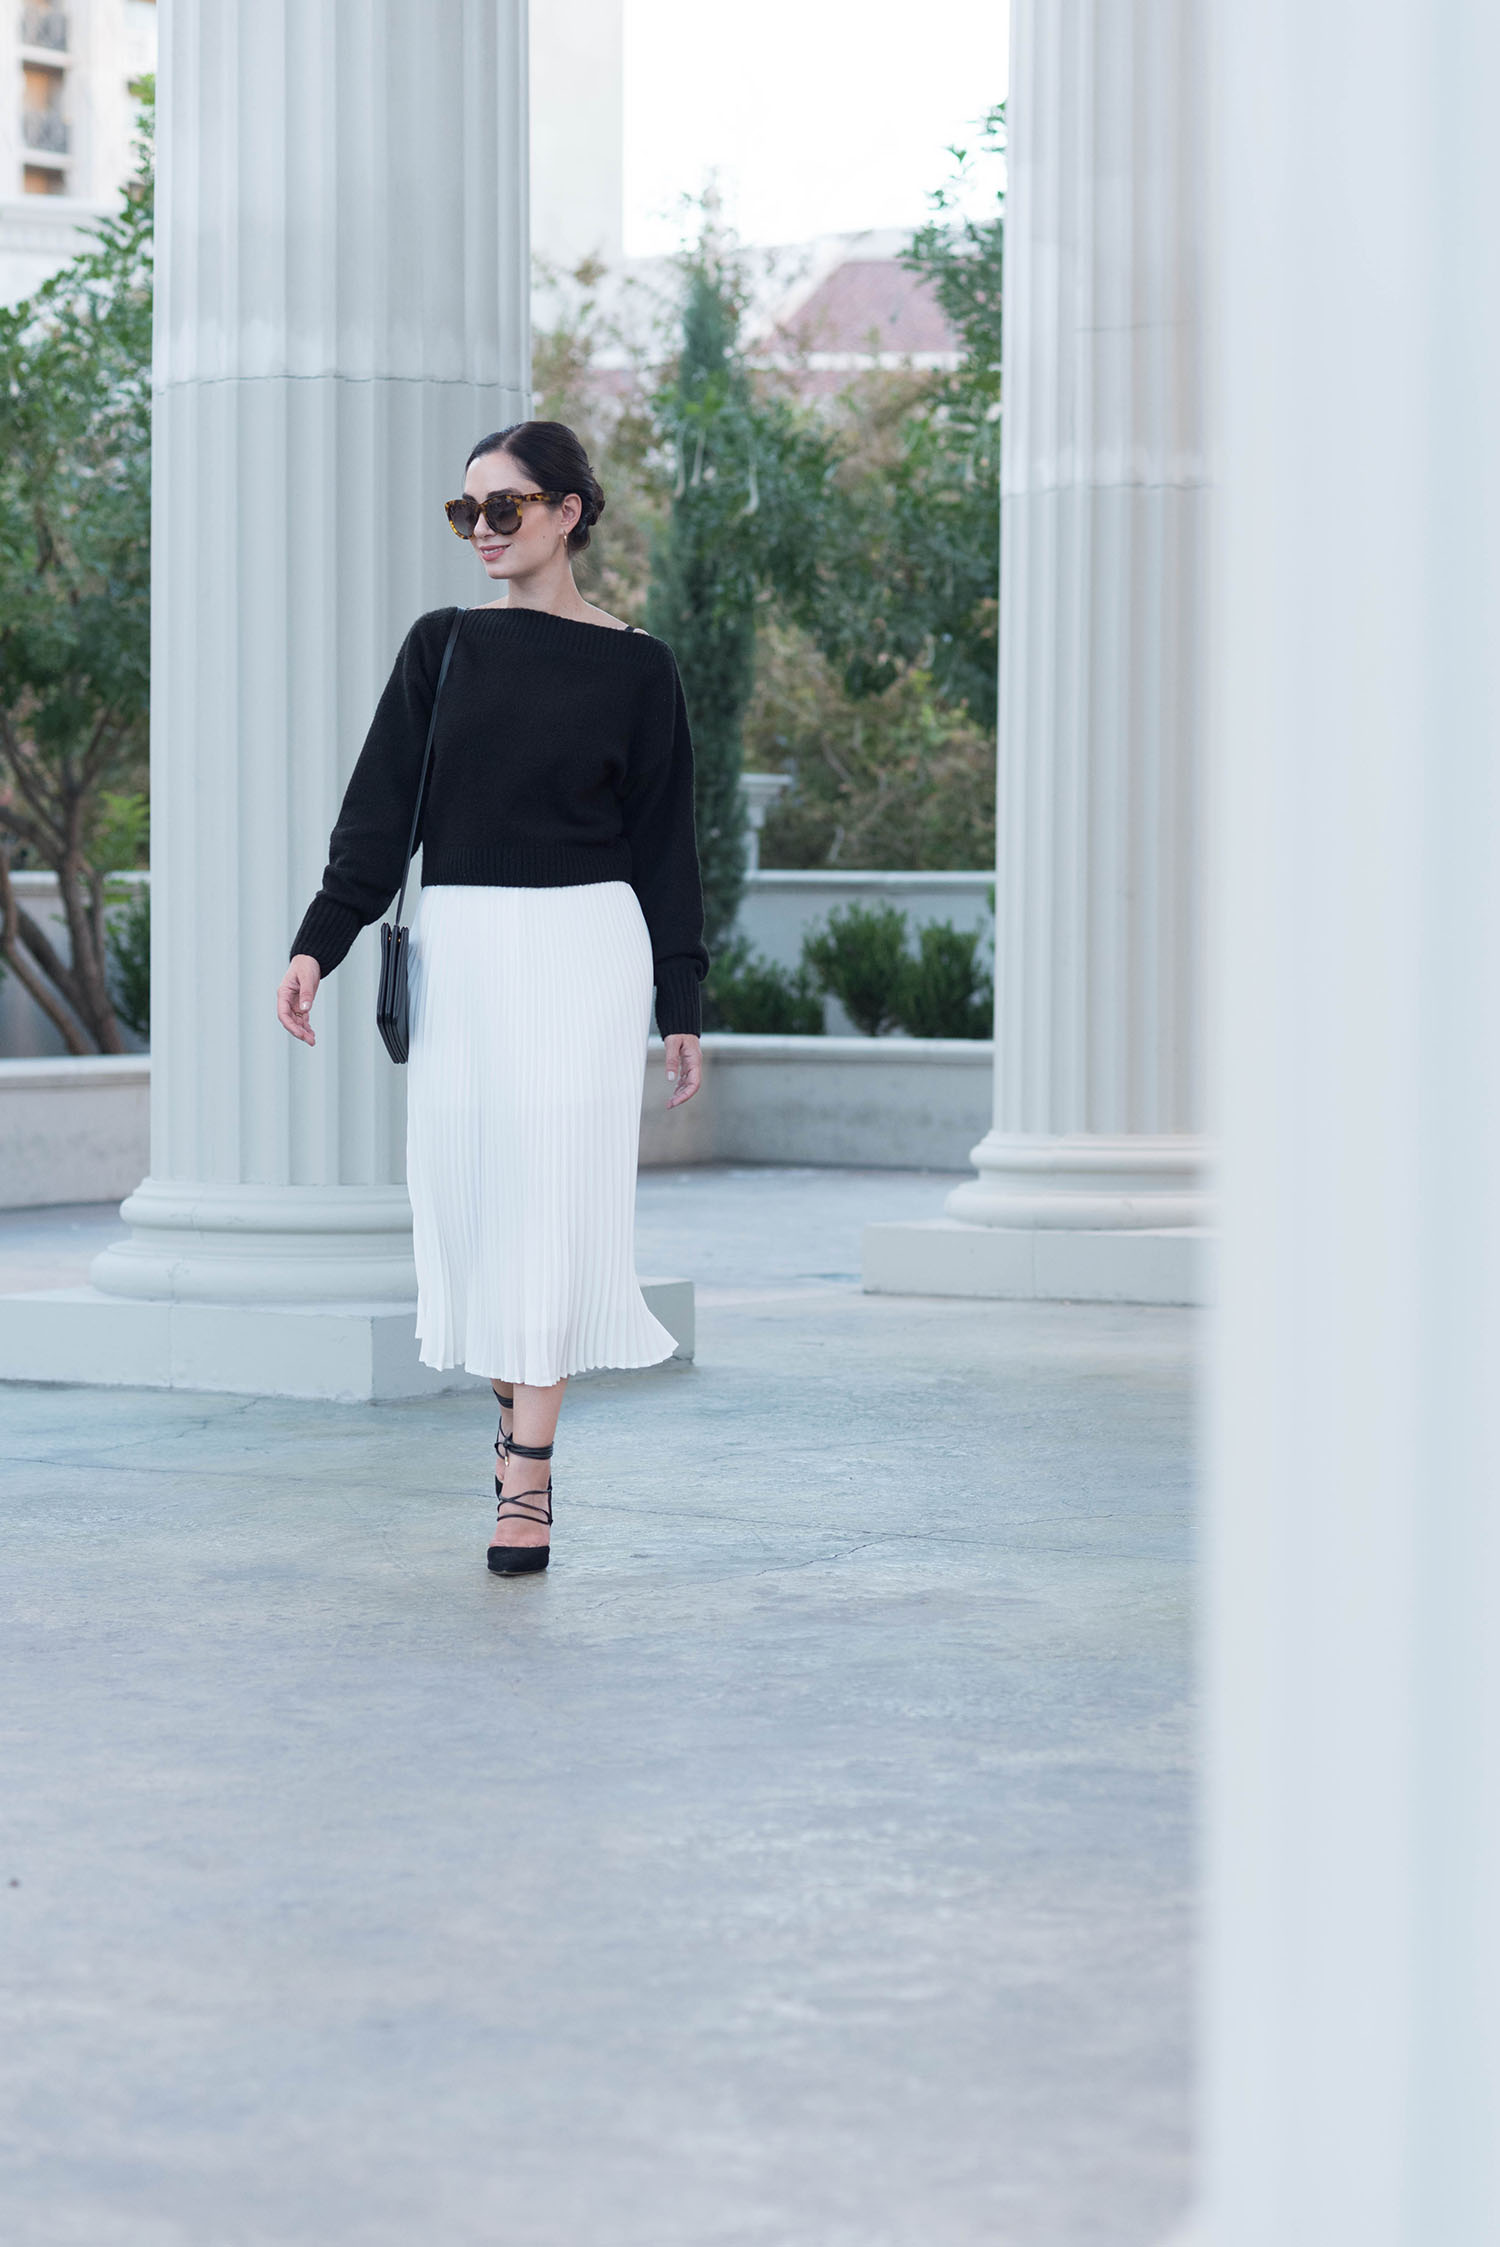 Fashion blogger Cee Fardoe of Coco & Vera walks among the columns at Caesar's Palace in Las Vegas, wearing an & Other Stories sweater and a white pleated skirt